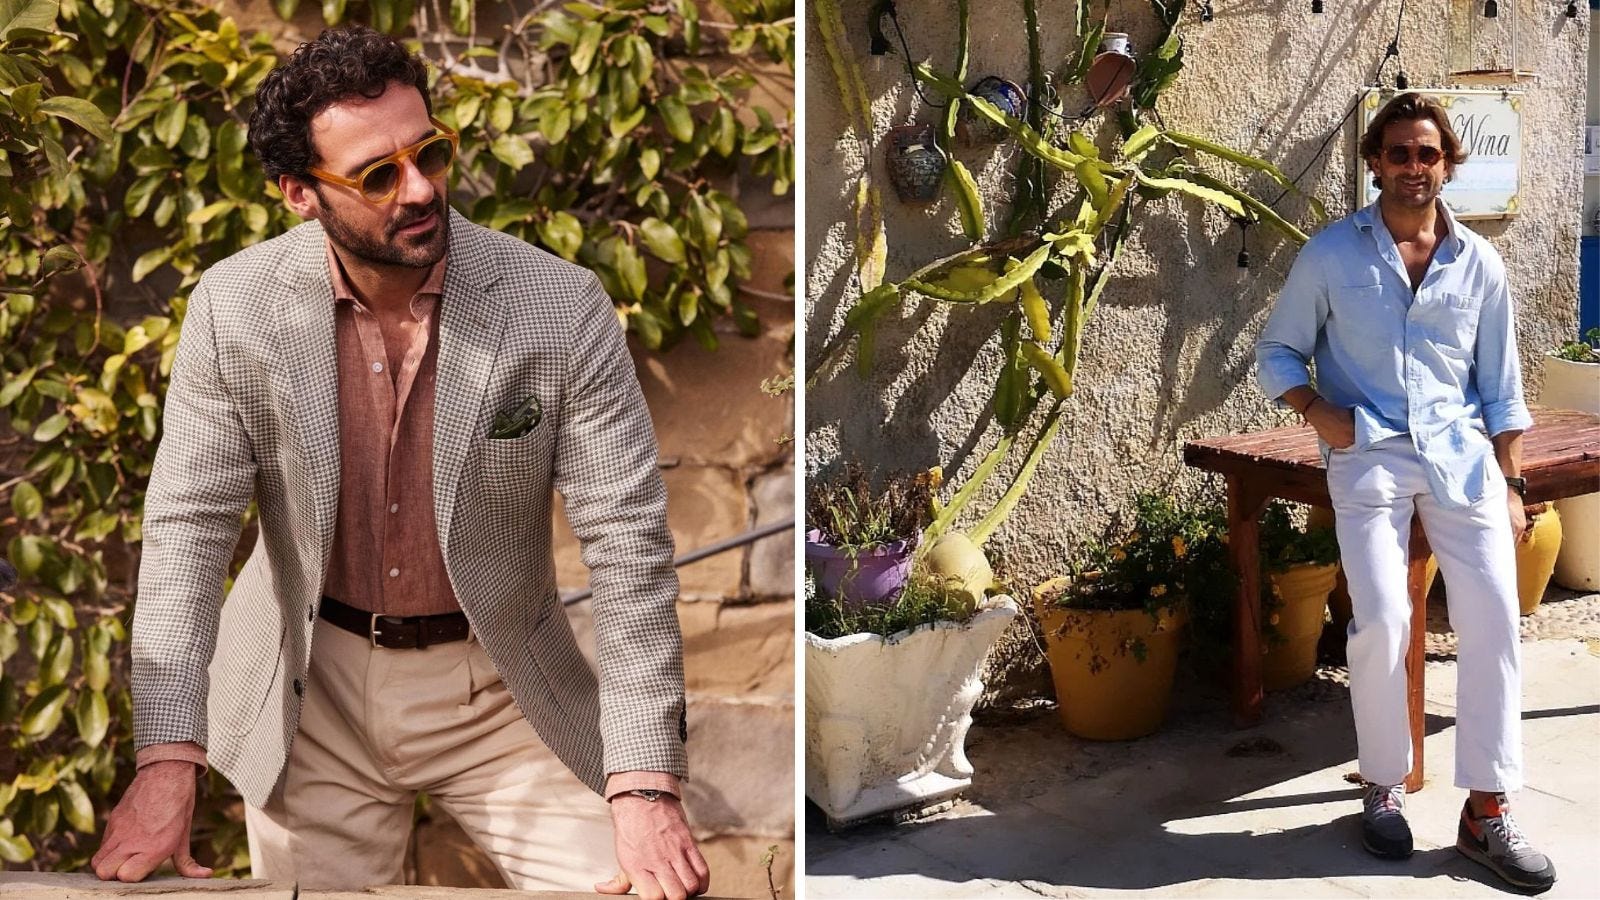 side by side images of men dressed in classically elegant "Italian summer" style